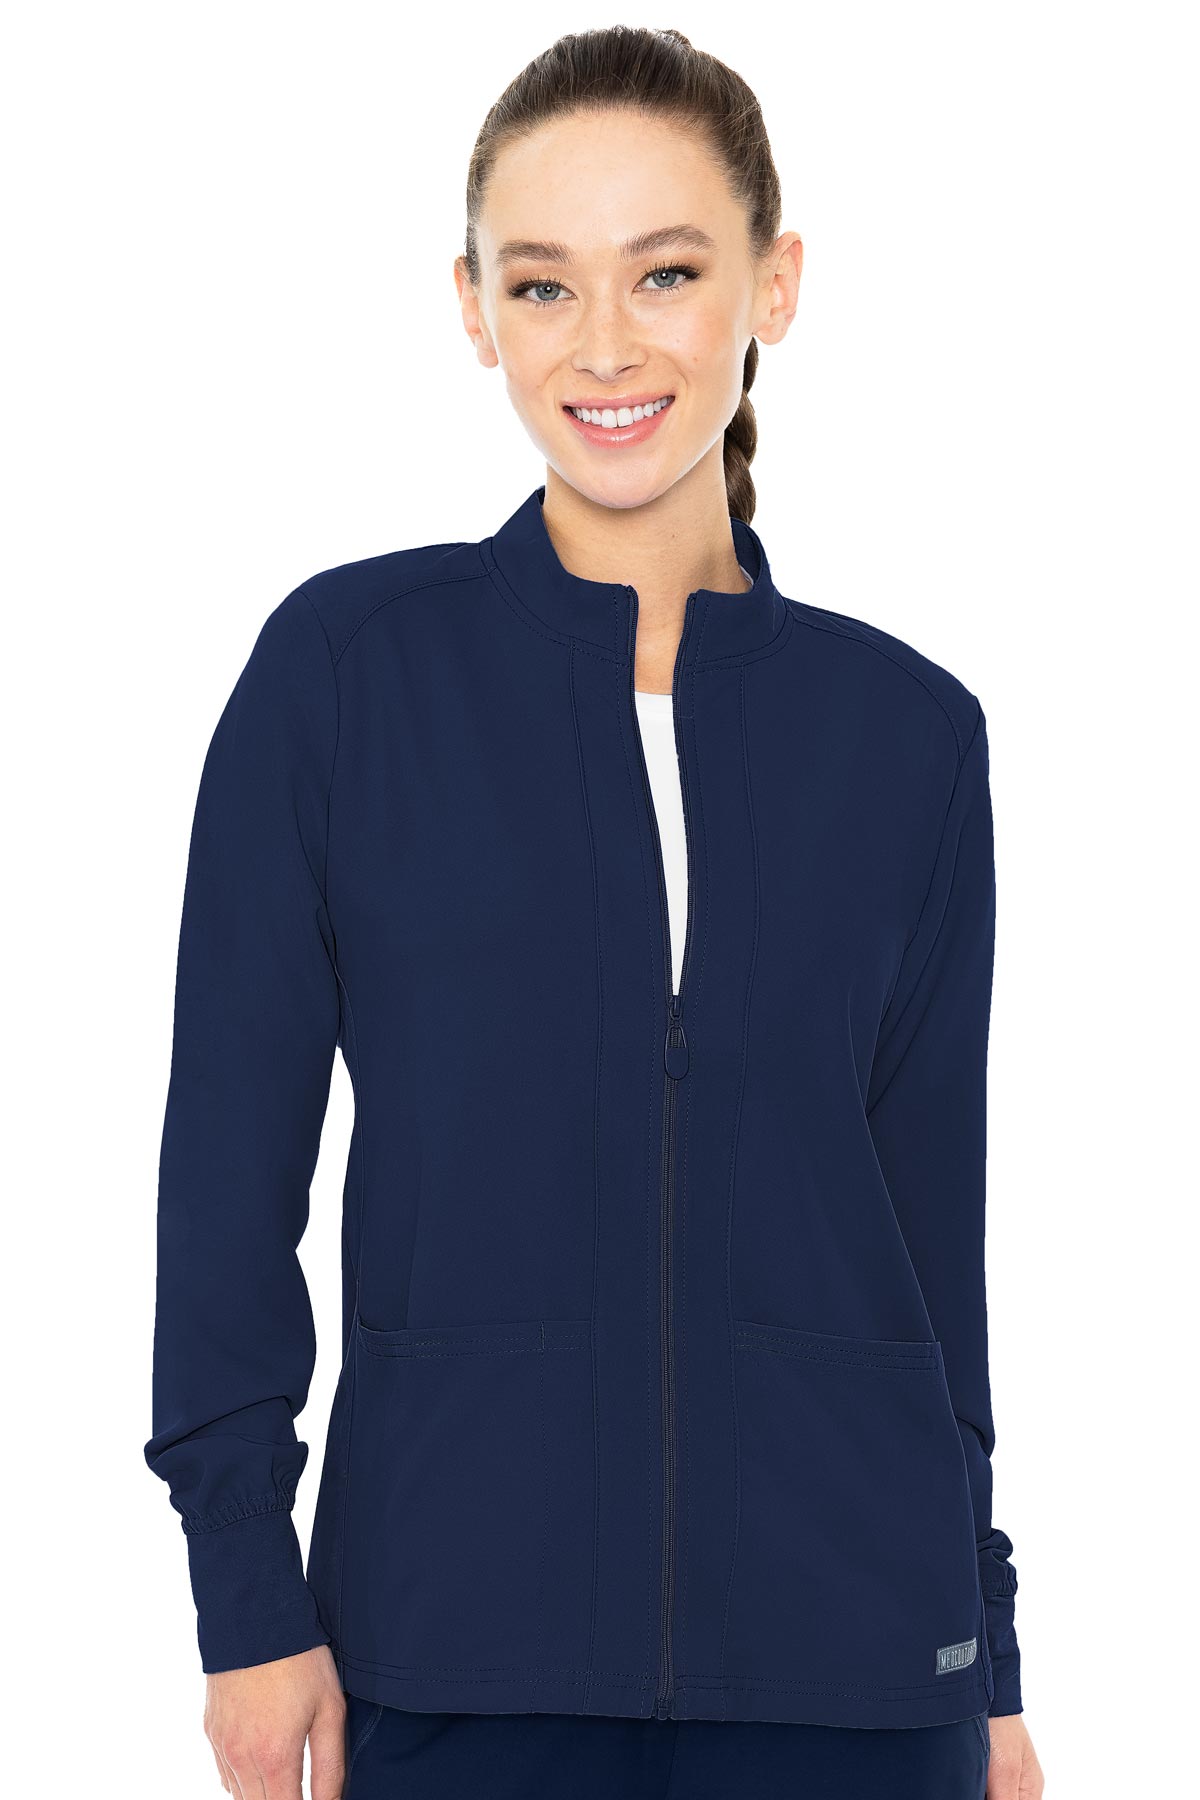 Med Couture Navy WARM